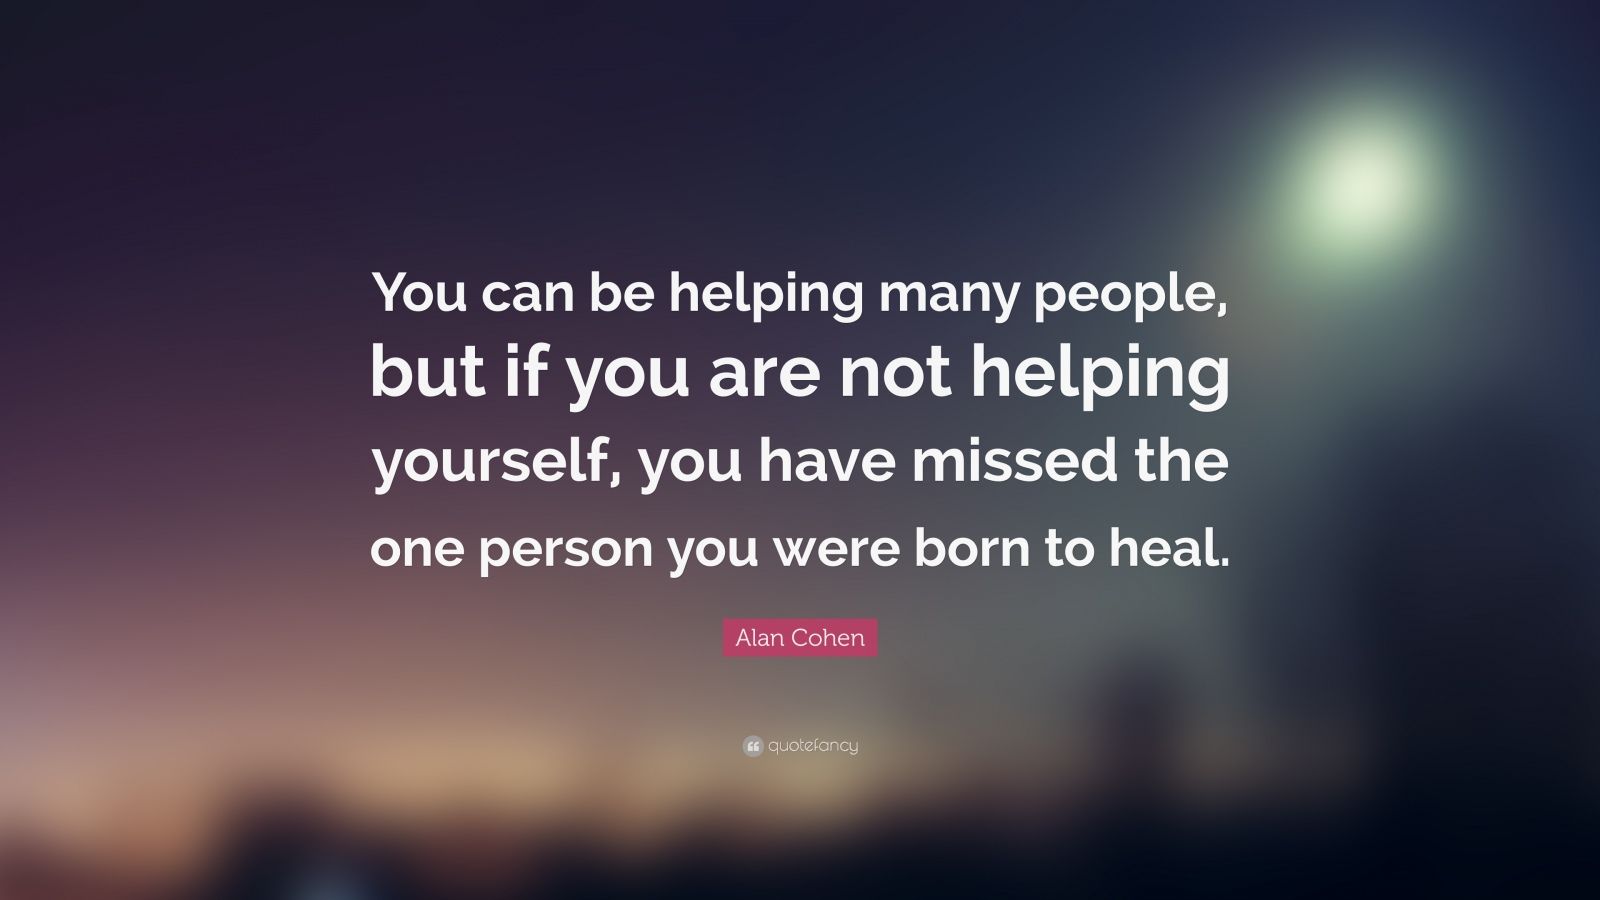 Alan Cohen Quote: “You can be helping many people, but if you are not ...